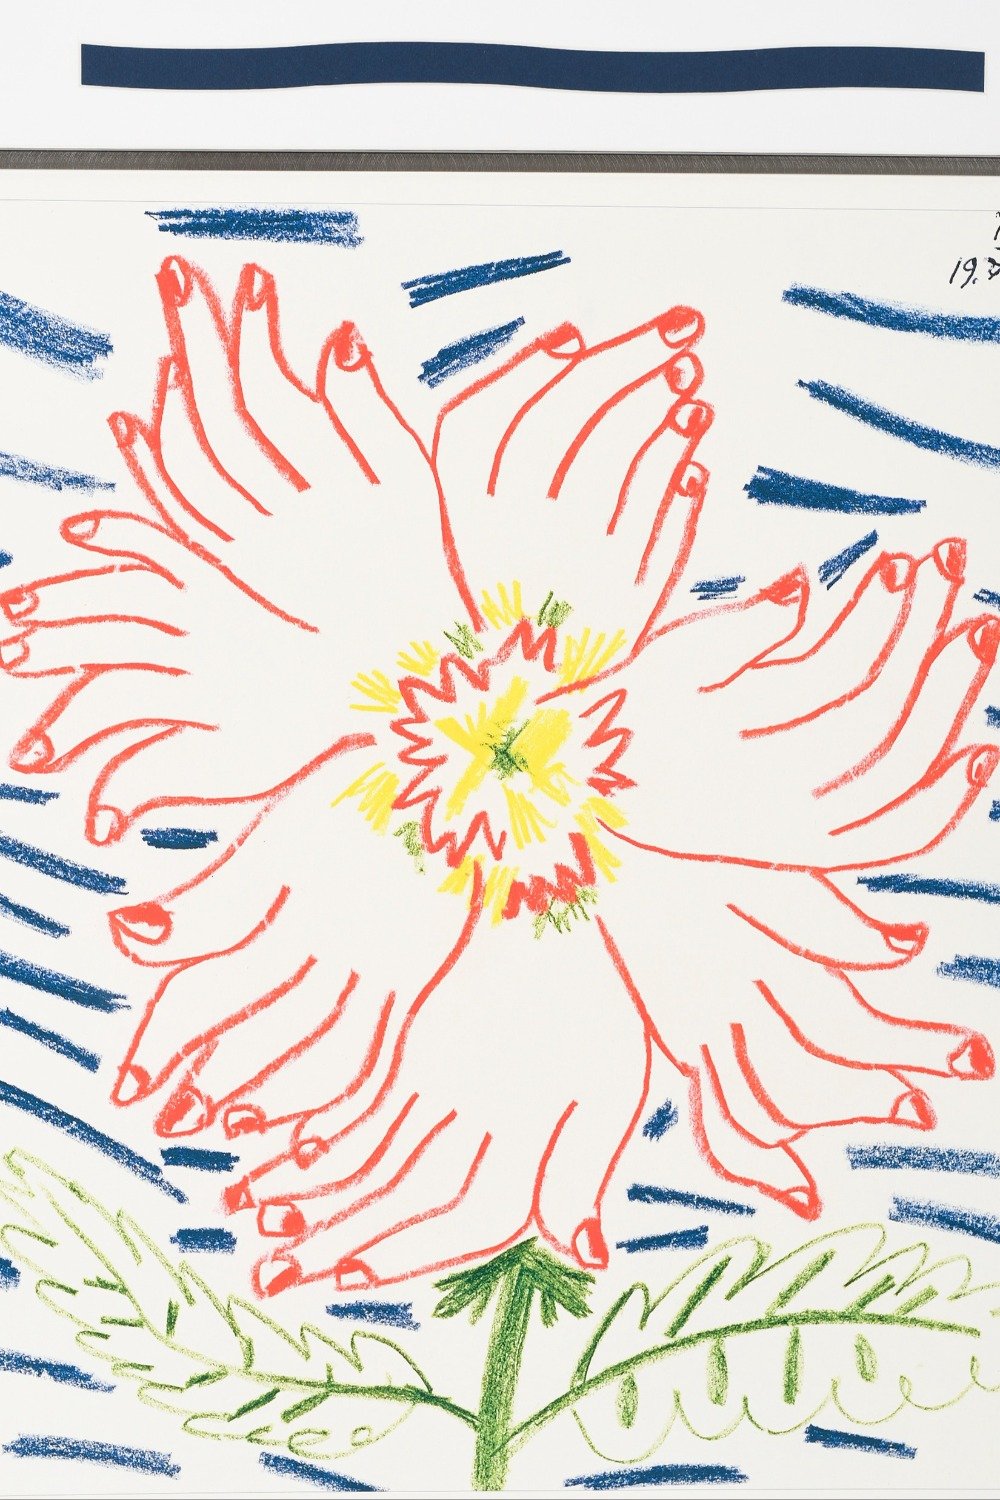 A limited edition print by PABLO PICASSO titled "Flower of Hands" It is one of only 50 produced - Image 4 of 10